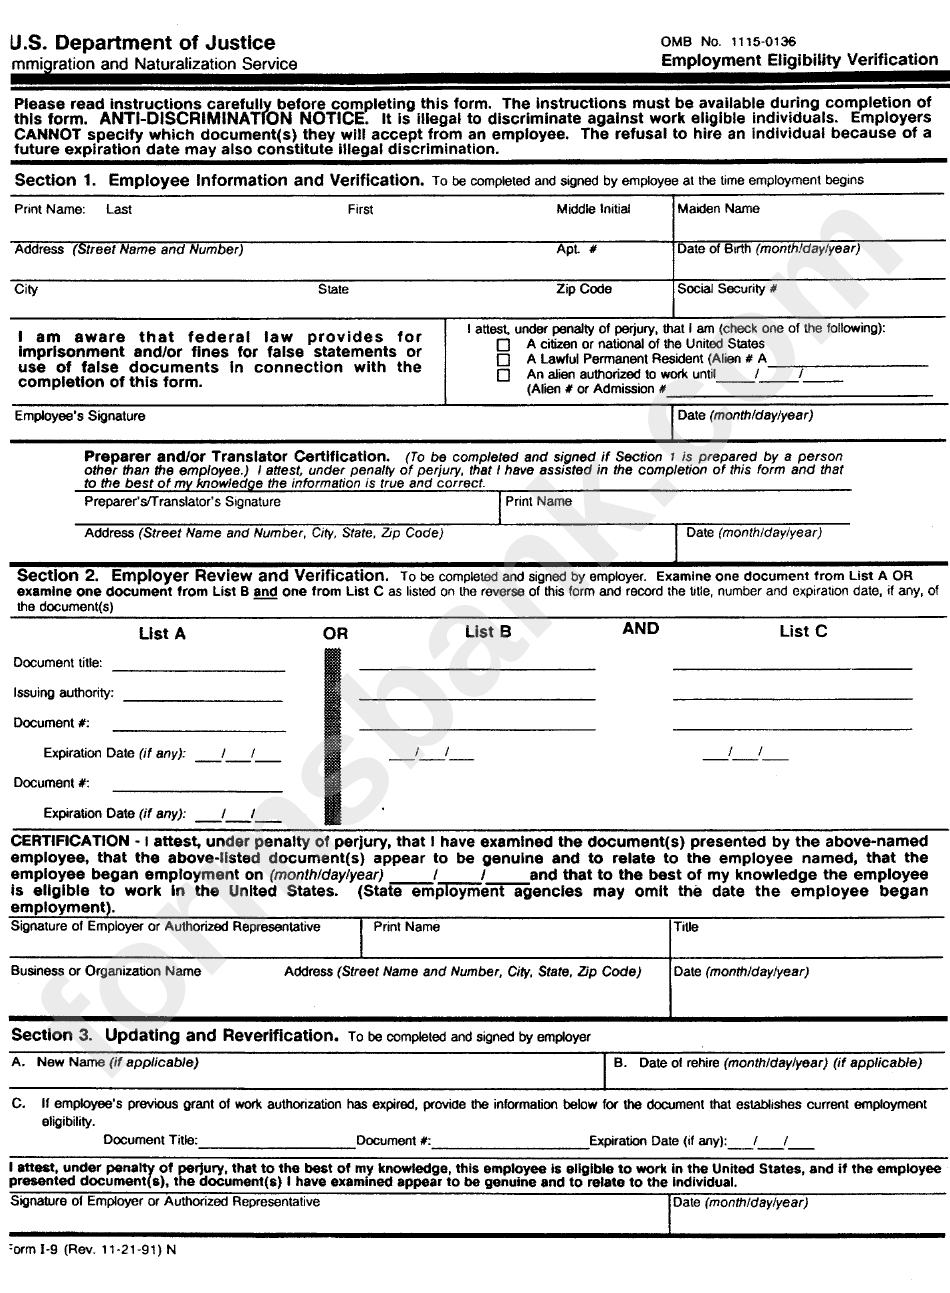 Form I-9 - Employment Eligibility Verification Form - U.s. Department Of Justice